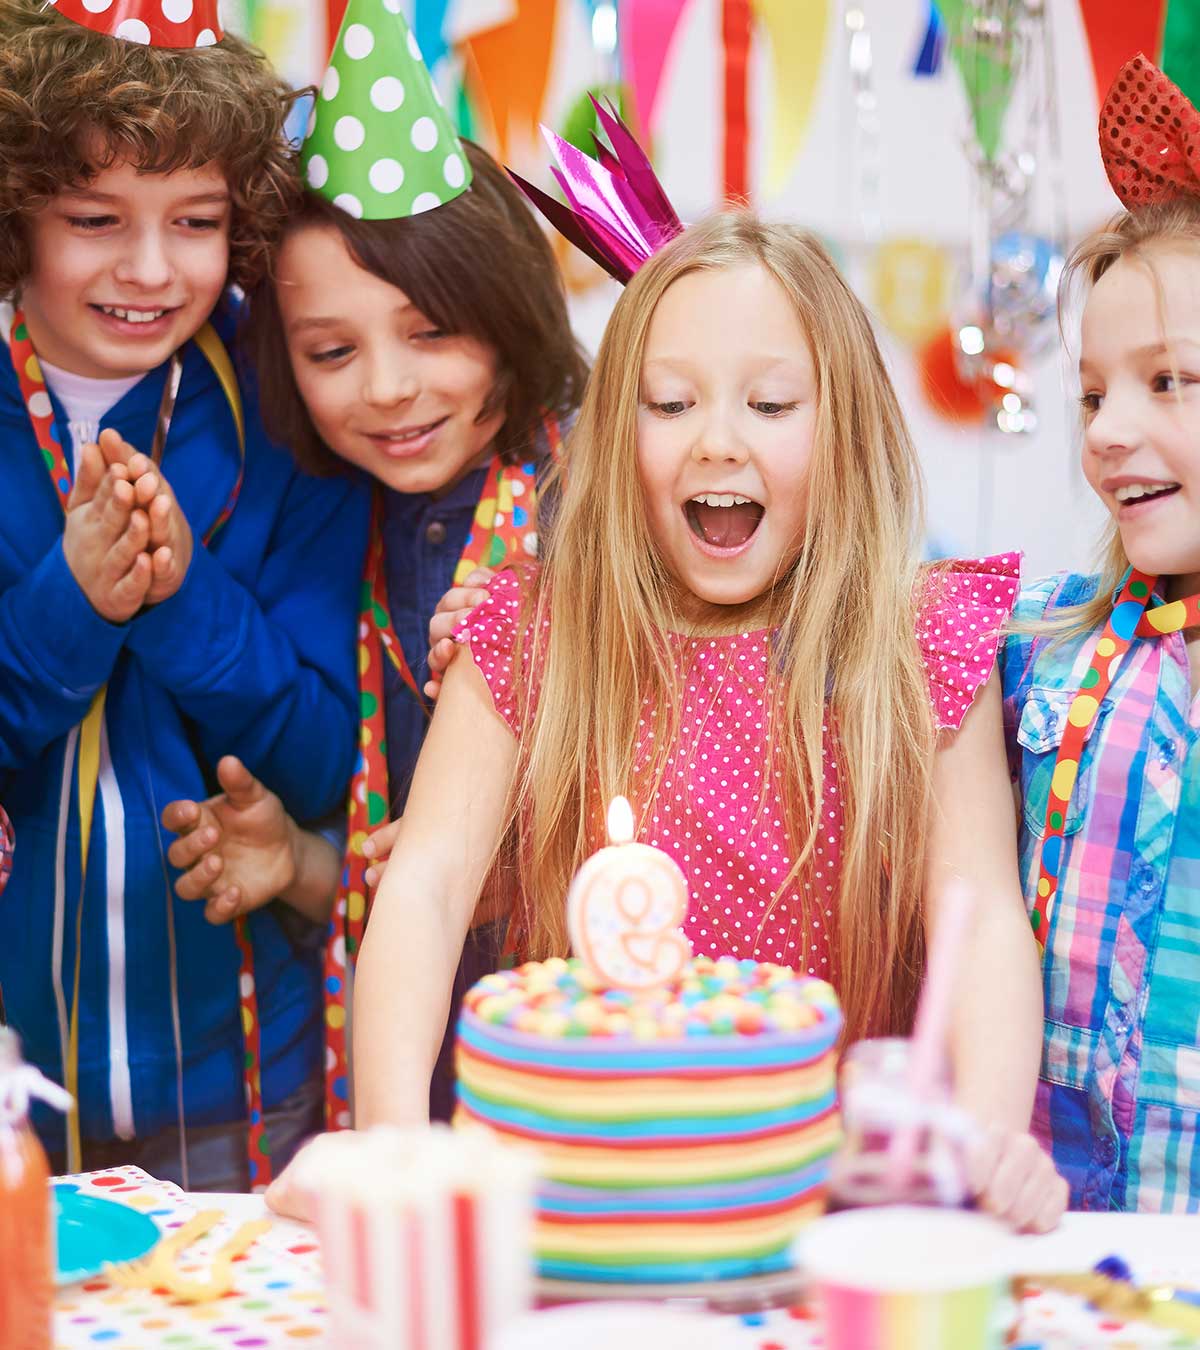 How To Choose a Birthday Cake For Your Kids?￼